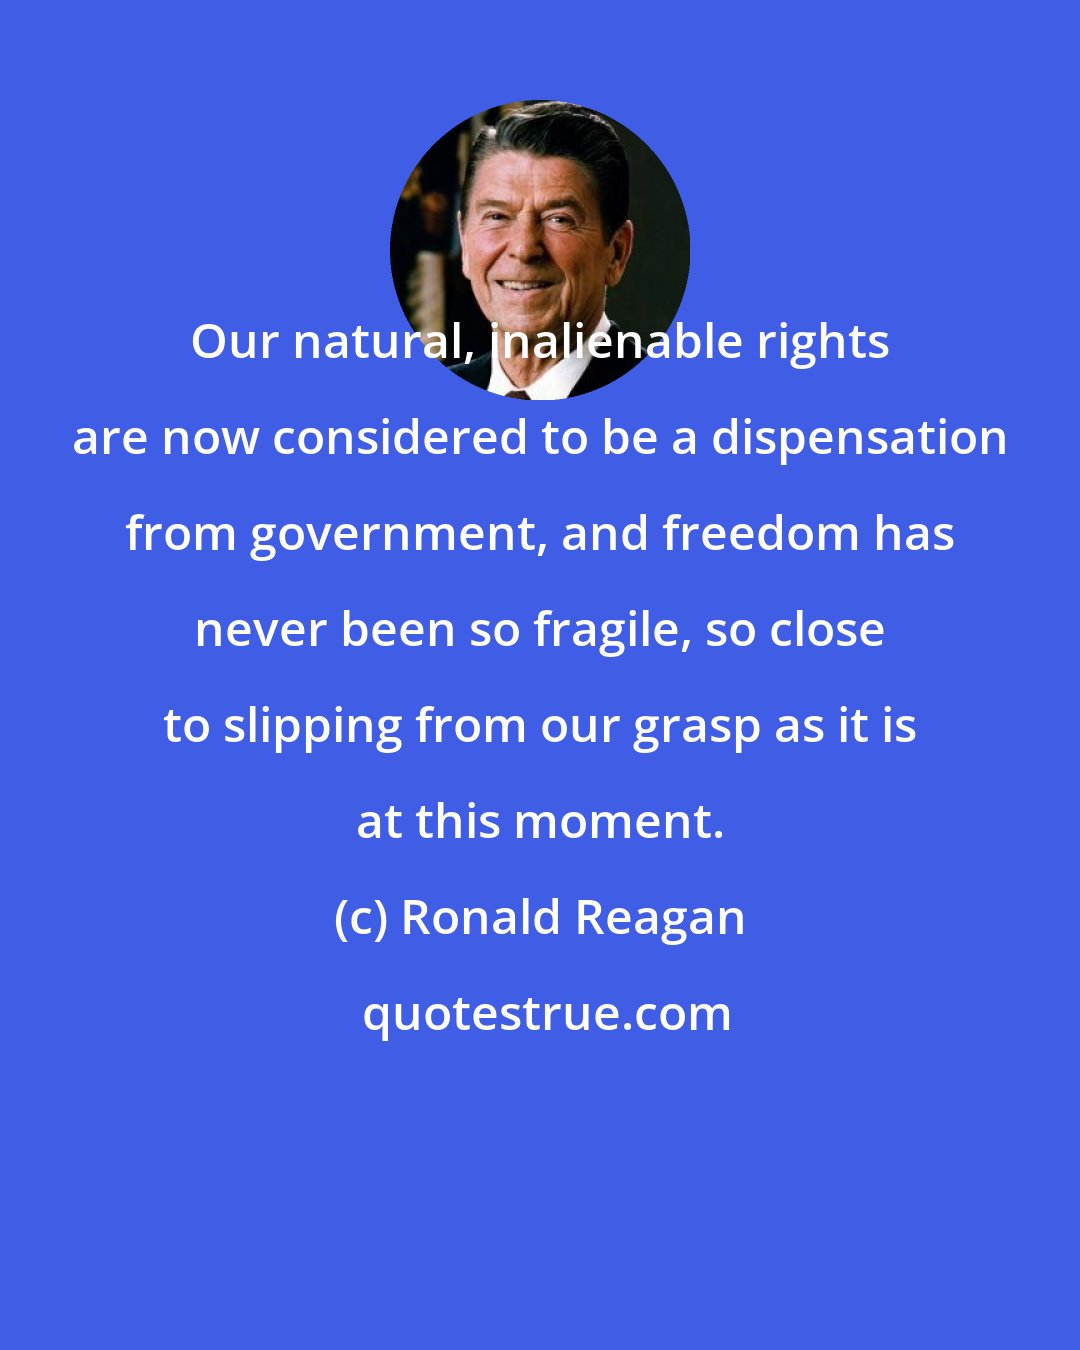 Ronald Reagan: Our natural, inalienable rights are now considered to be a dispensation from government, and freedom has never been so fragile, so close to slipping from our grasp as it is at this moment.